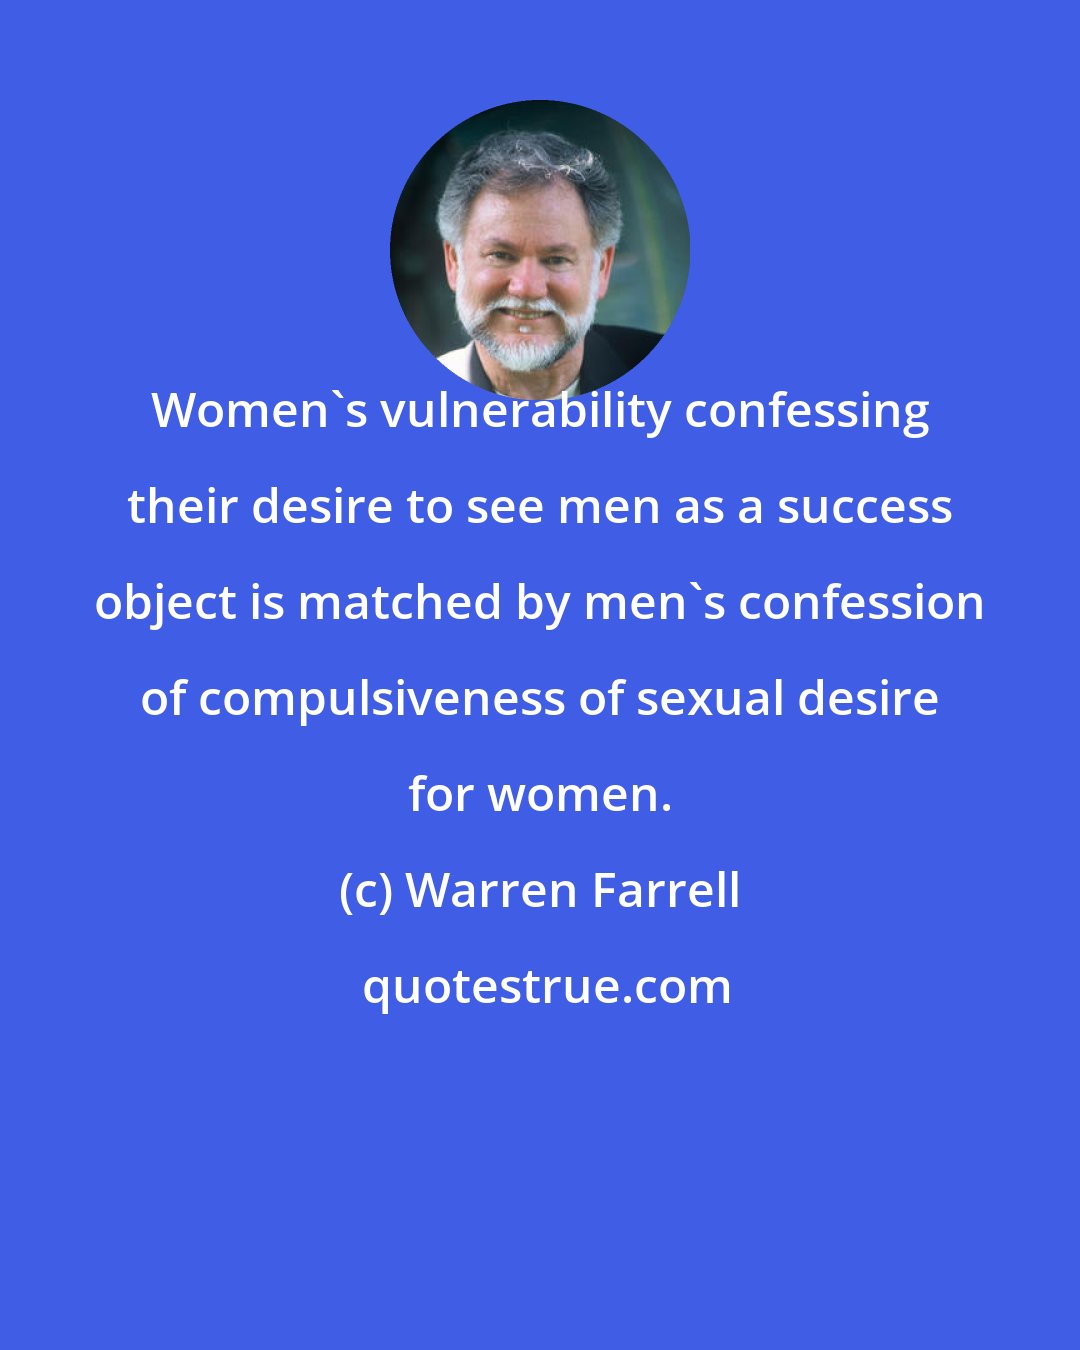 Warren Farrell: Women's vulnerability confessing their desire to see men as a success object is matched by men's confession of compulsiveness of sexual desire for women.